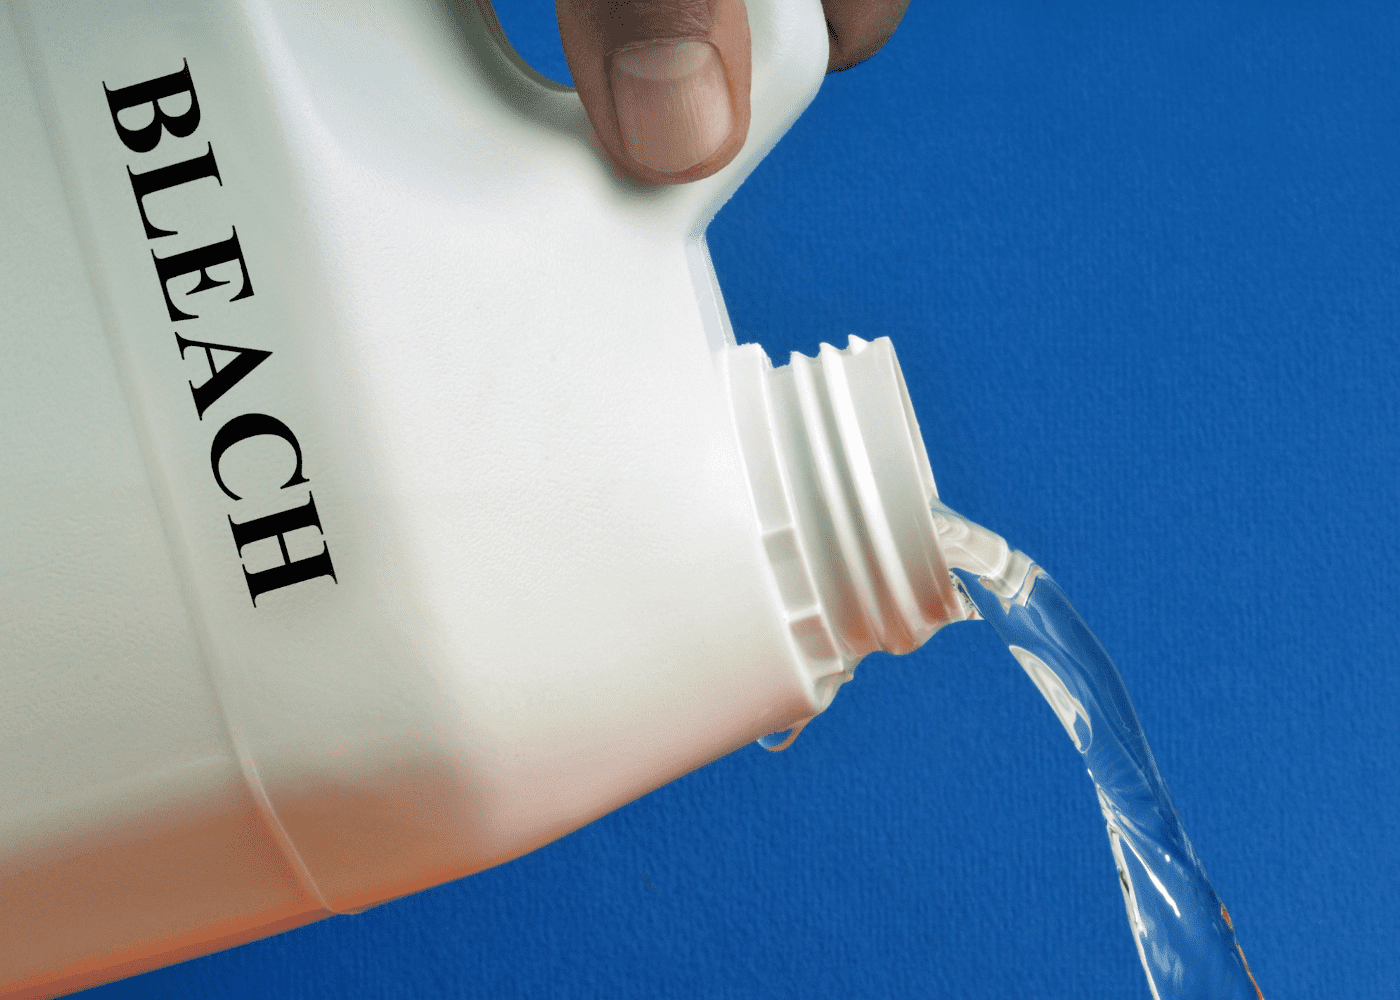 A bottle of bleach being poured.